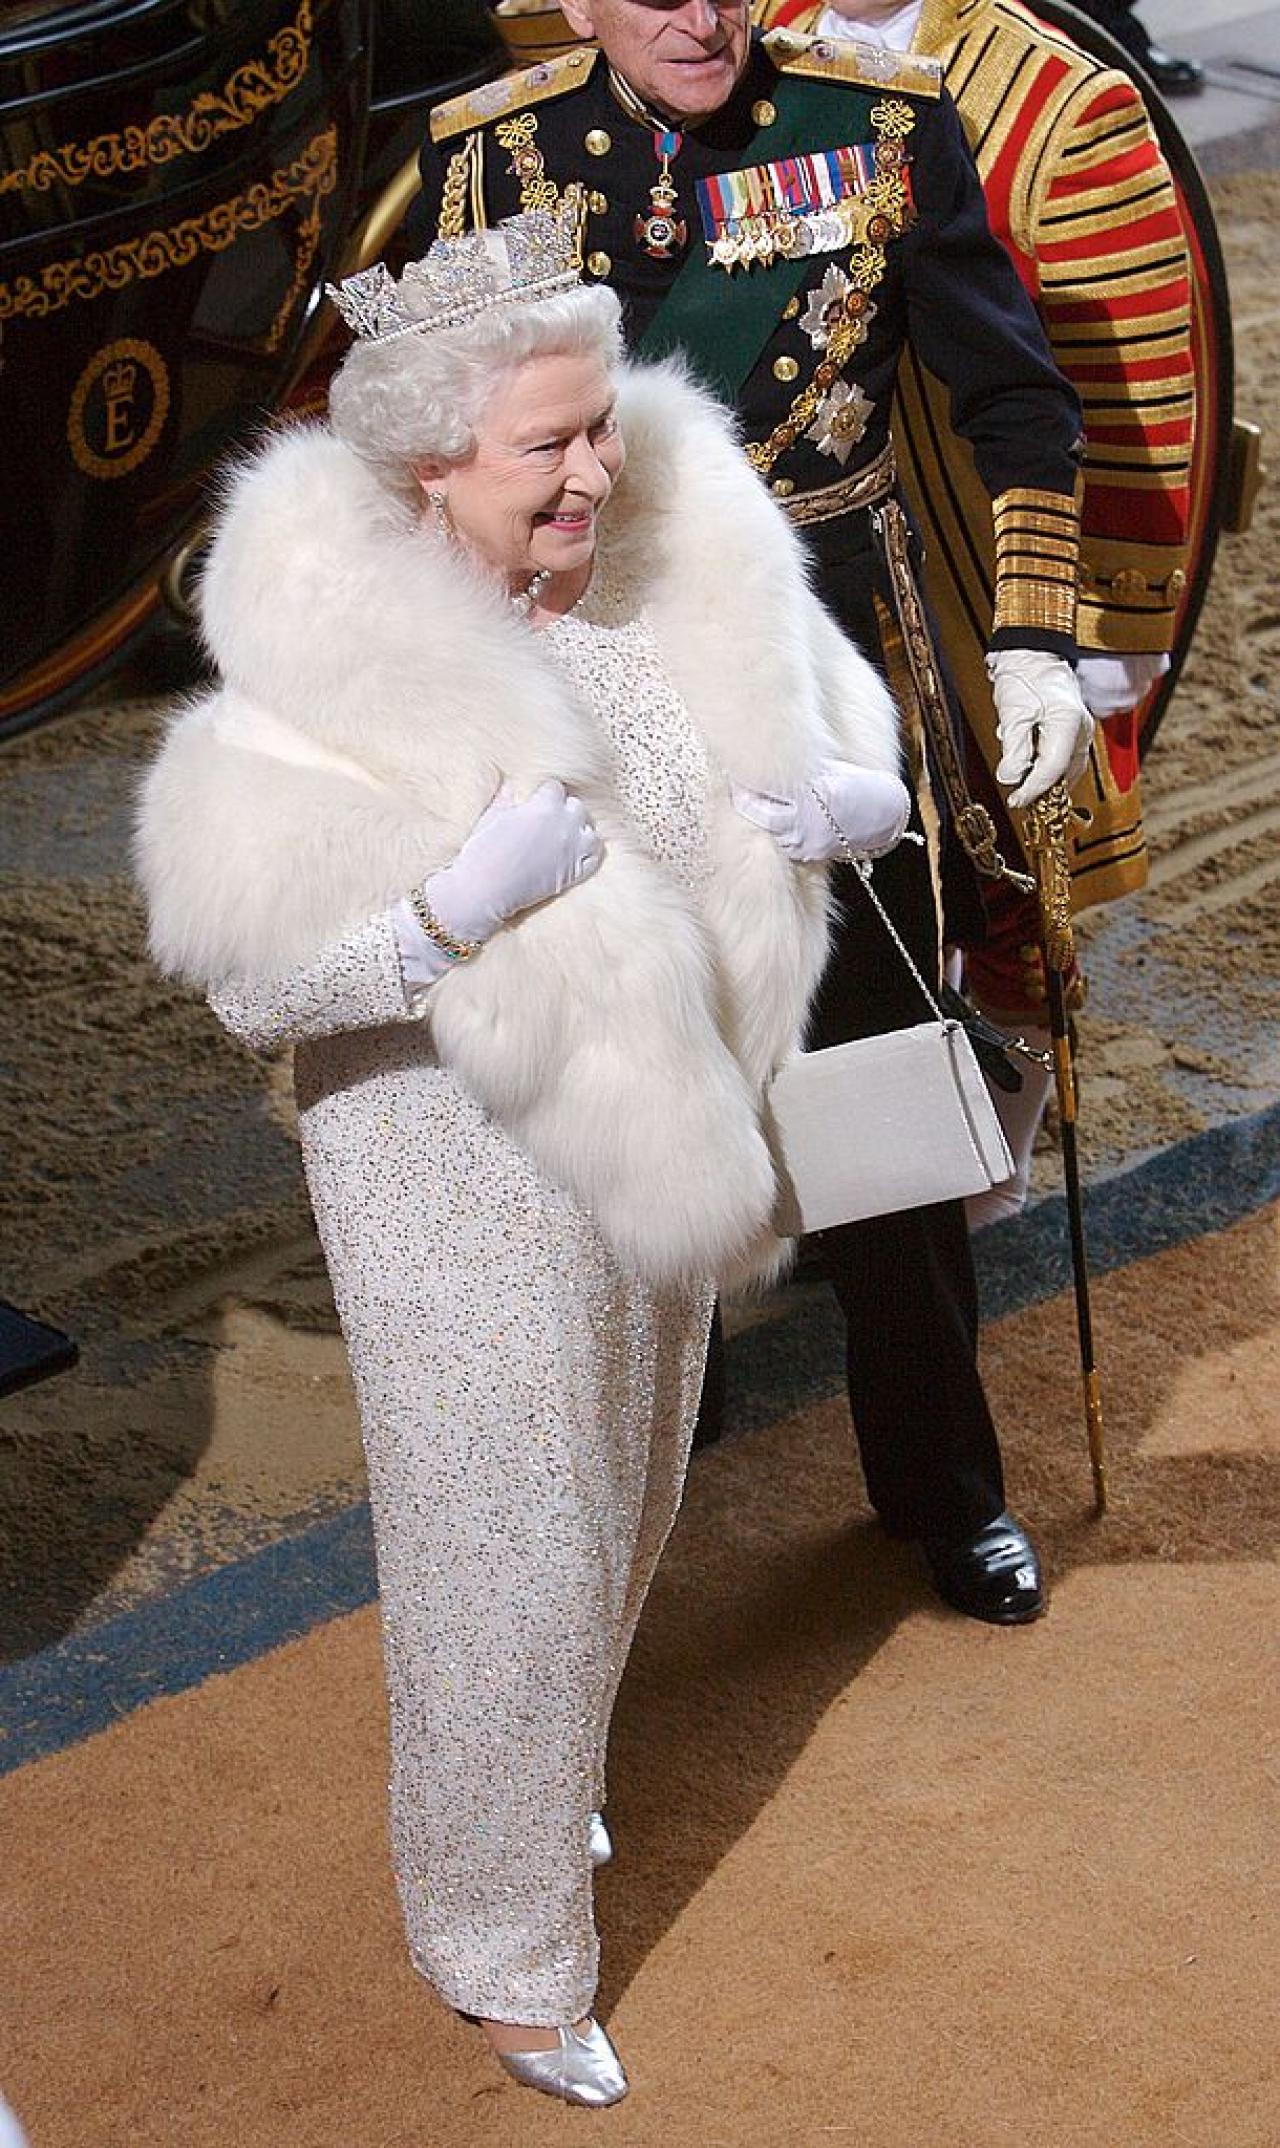 Queen Elizabeth ll arrives at the House of Lords for the State Opening of Parliament on November 15, 2006. (Photo by Anwar Hussein Collection/ROTA/WireImage)